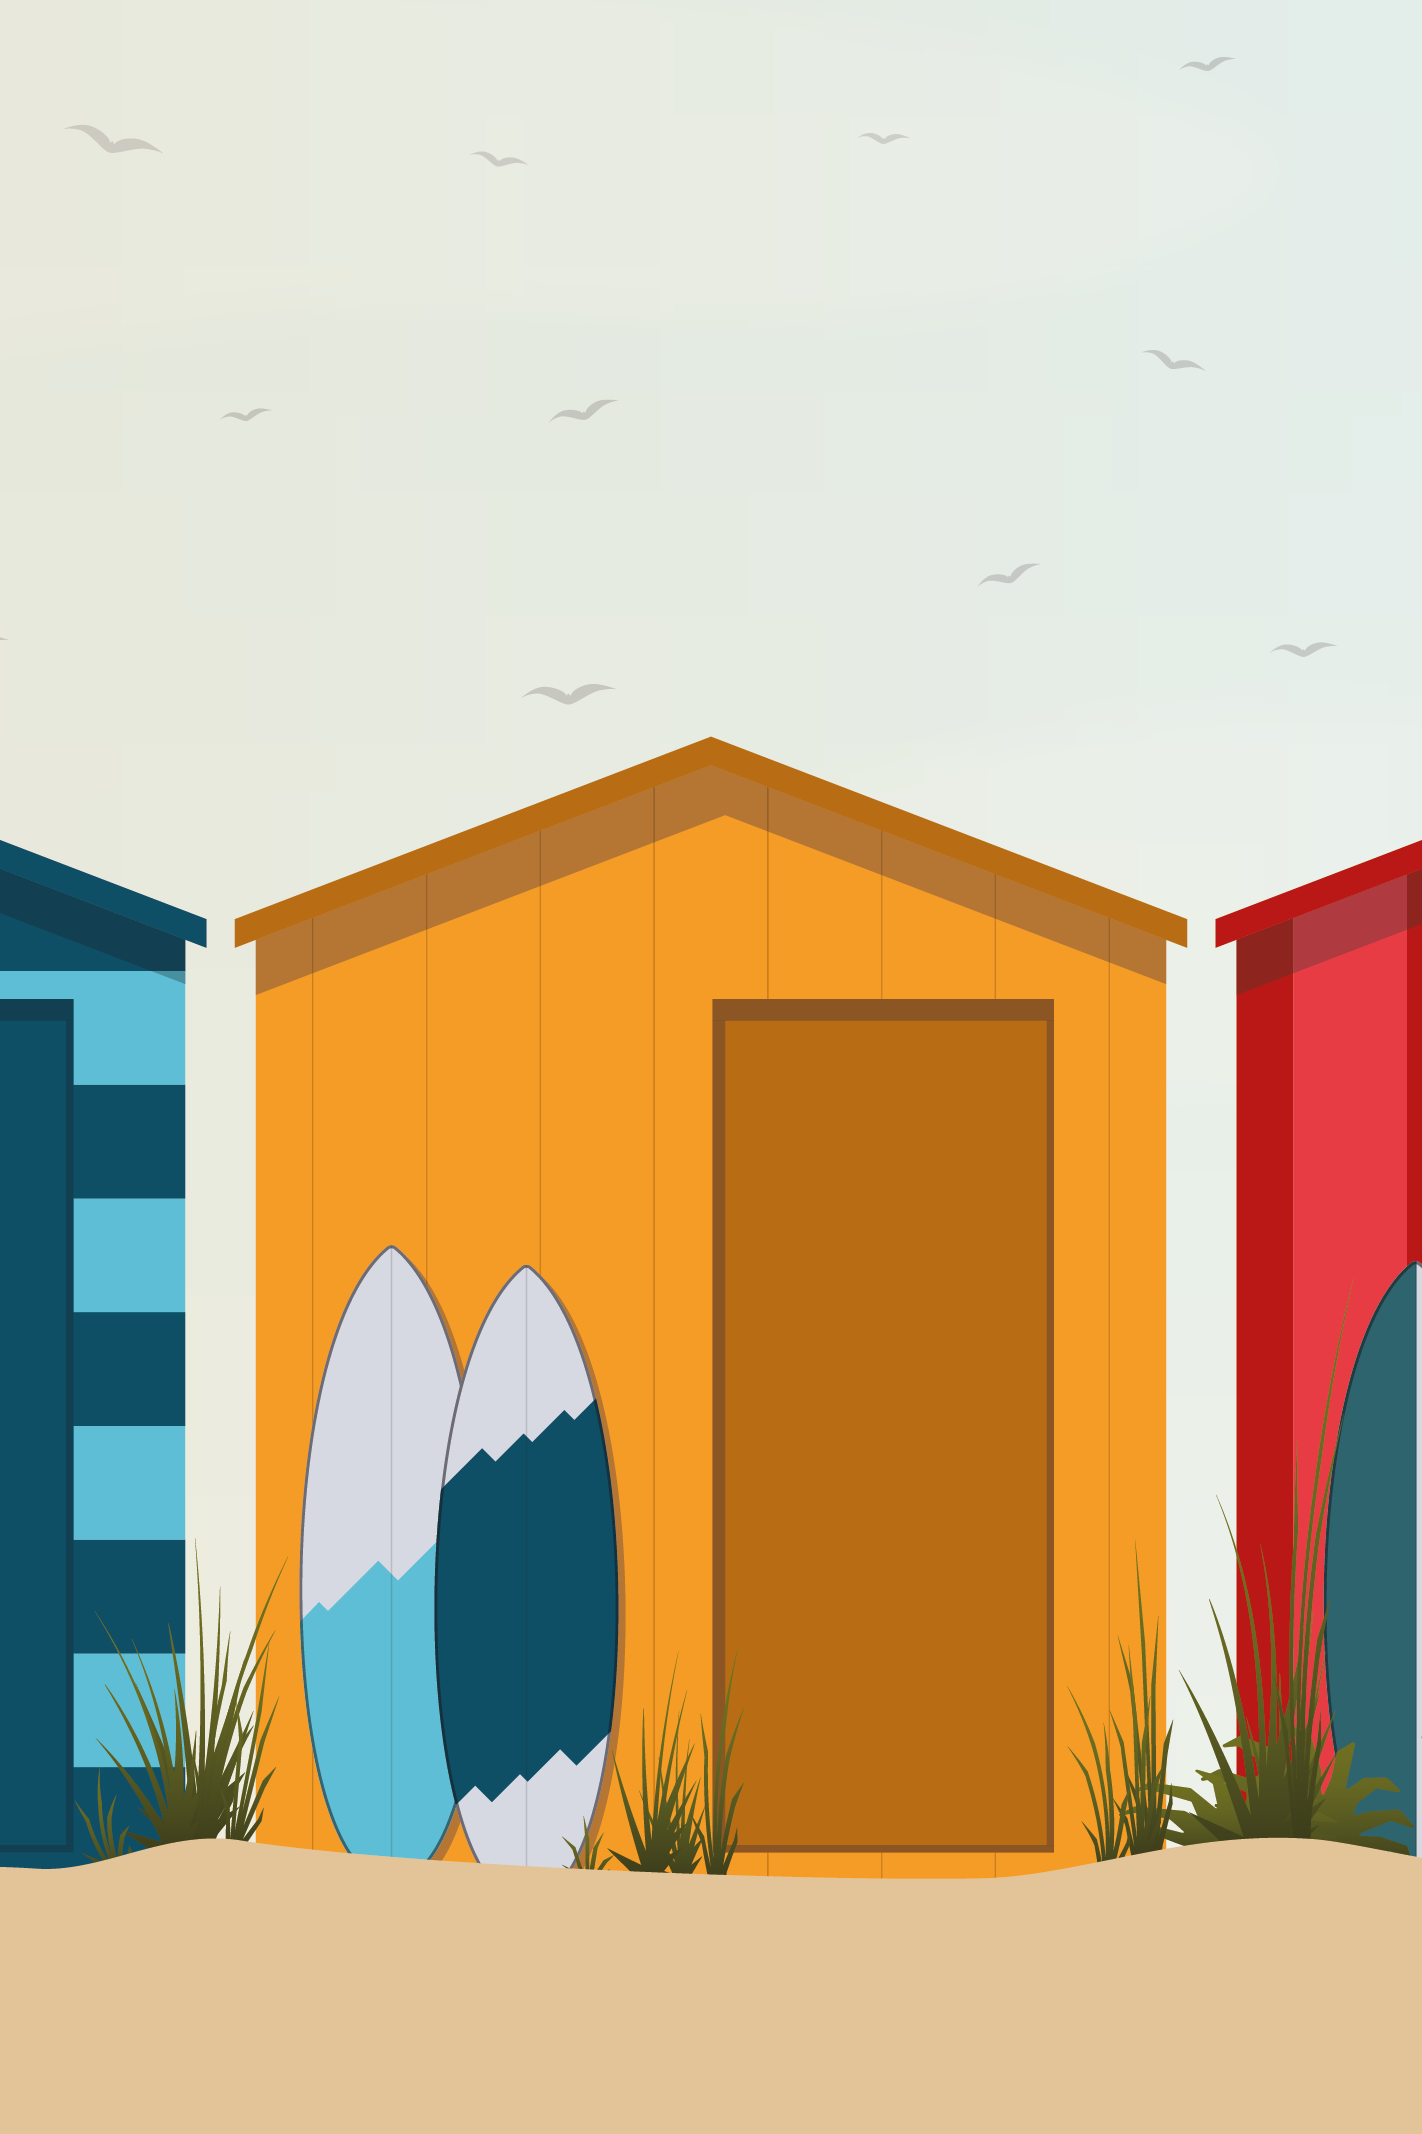 Beach huts and surf boards illustration by Xavier Wendling